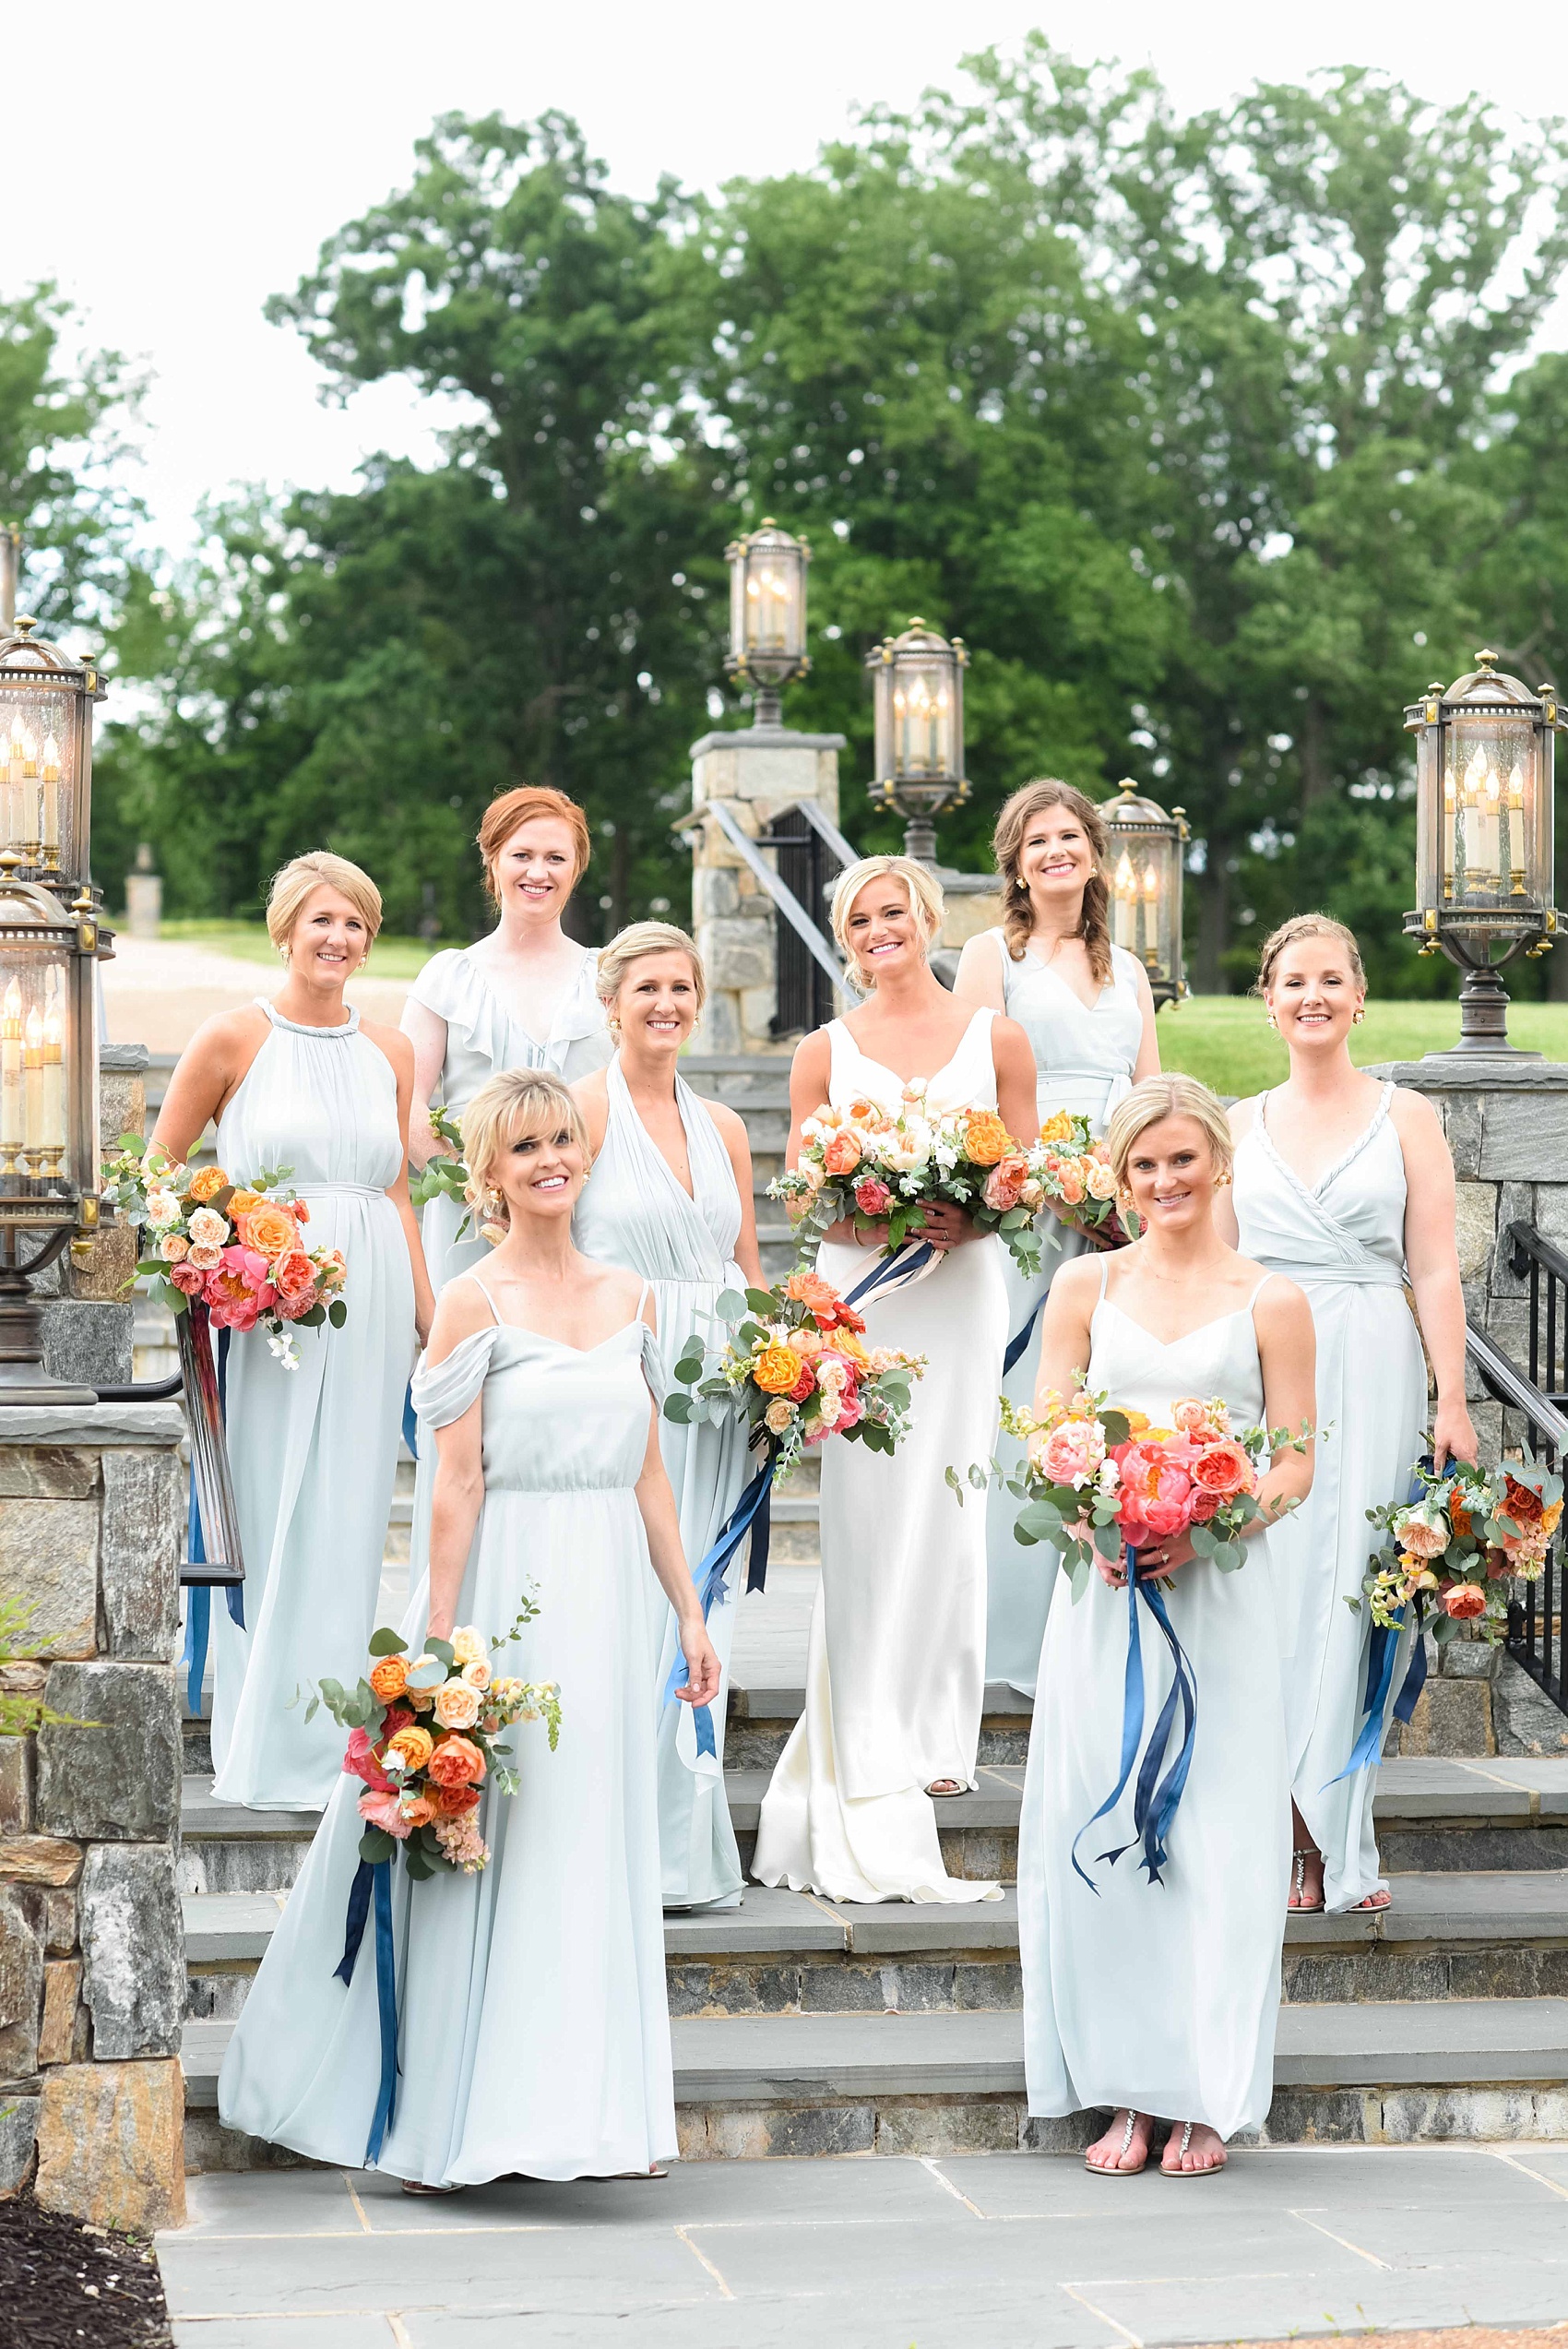 Charlottesville wedding photos by Mikkel Paige Photography. This Virginia venue is perfect for brides and grooms looking for a beautiful farm reception space. It’s green, romantic, and easy to dress up with flowers or keep simple. The bridesmaids wore mismatched mint green gowns and held colorful flowers. Click through for the complete post from this May event at the Lodge at Mount Ida Farm! Planning and design by @vivalevent and flowers by @apassarelli of Meristem Floral. #Charlottesville #mountidafarm #lodgeatmountida #CharlottesvilleVA #CharlottesvilleVirginia #Charlottesvillewedding #Charlottesvilleweddingphotographer #mikkelpaige #MeristemFloral #VivaLEvent